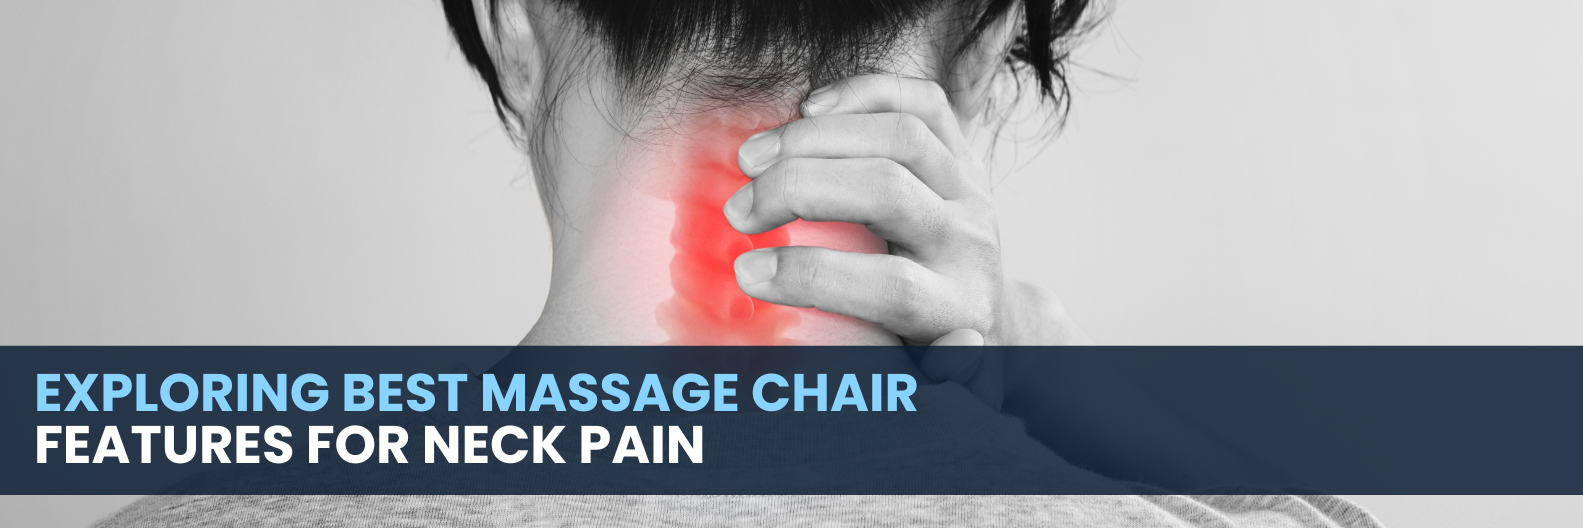 Discover which massage chair features are most useful for relieving neck pain. Learn about the most effective massage chair features for reducing neck pain.